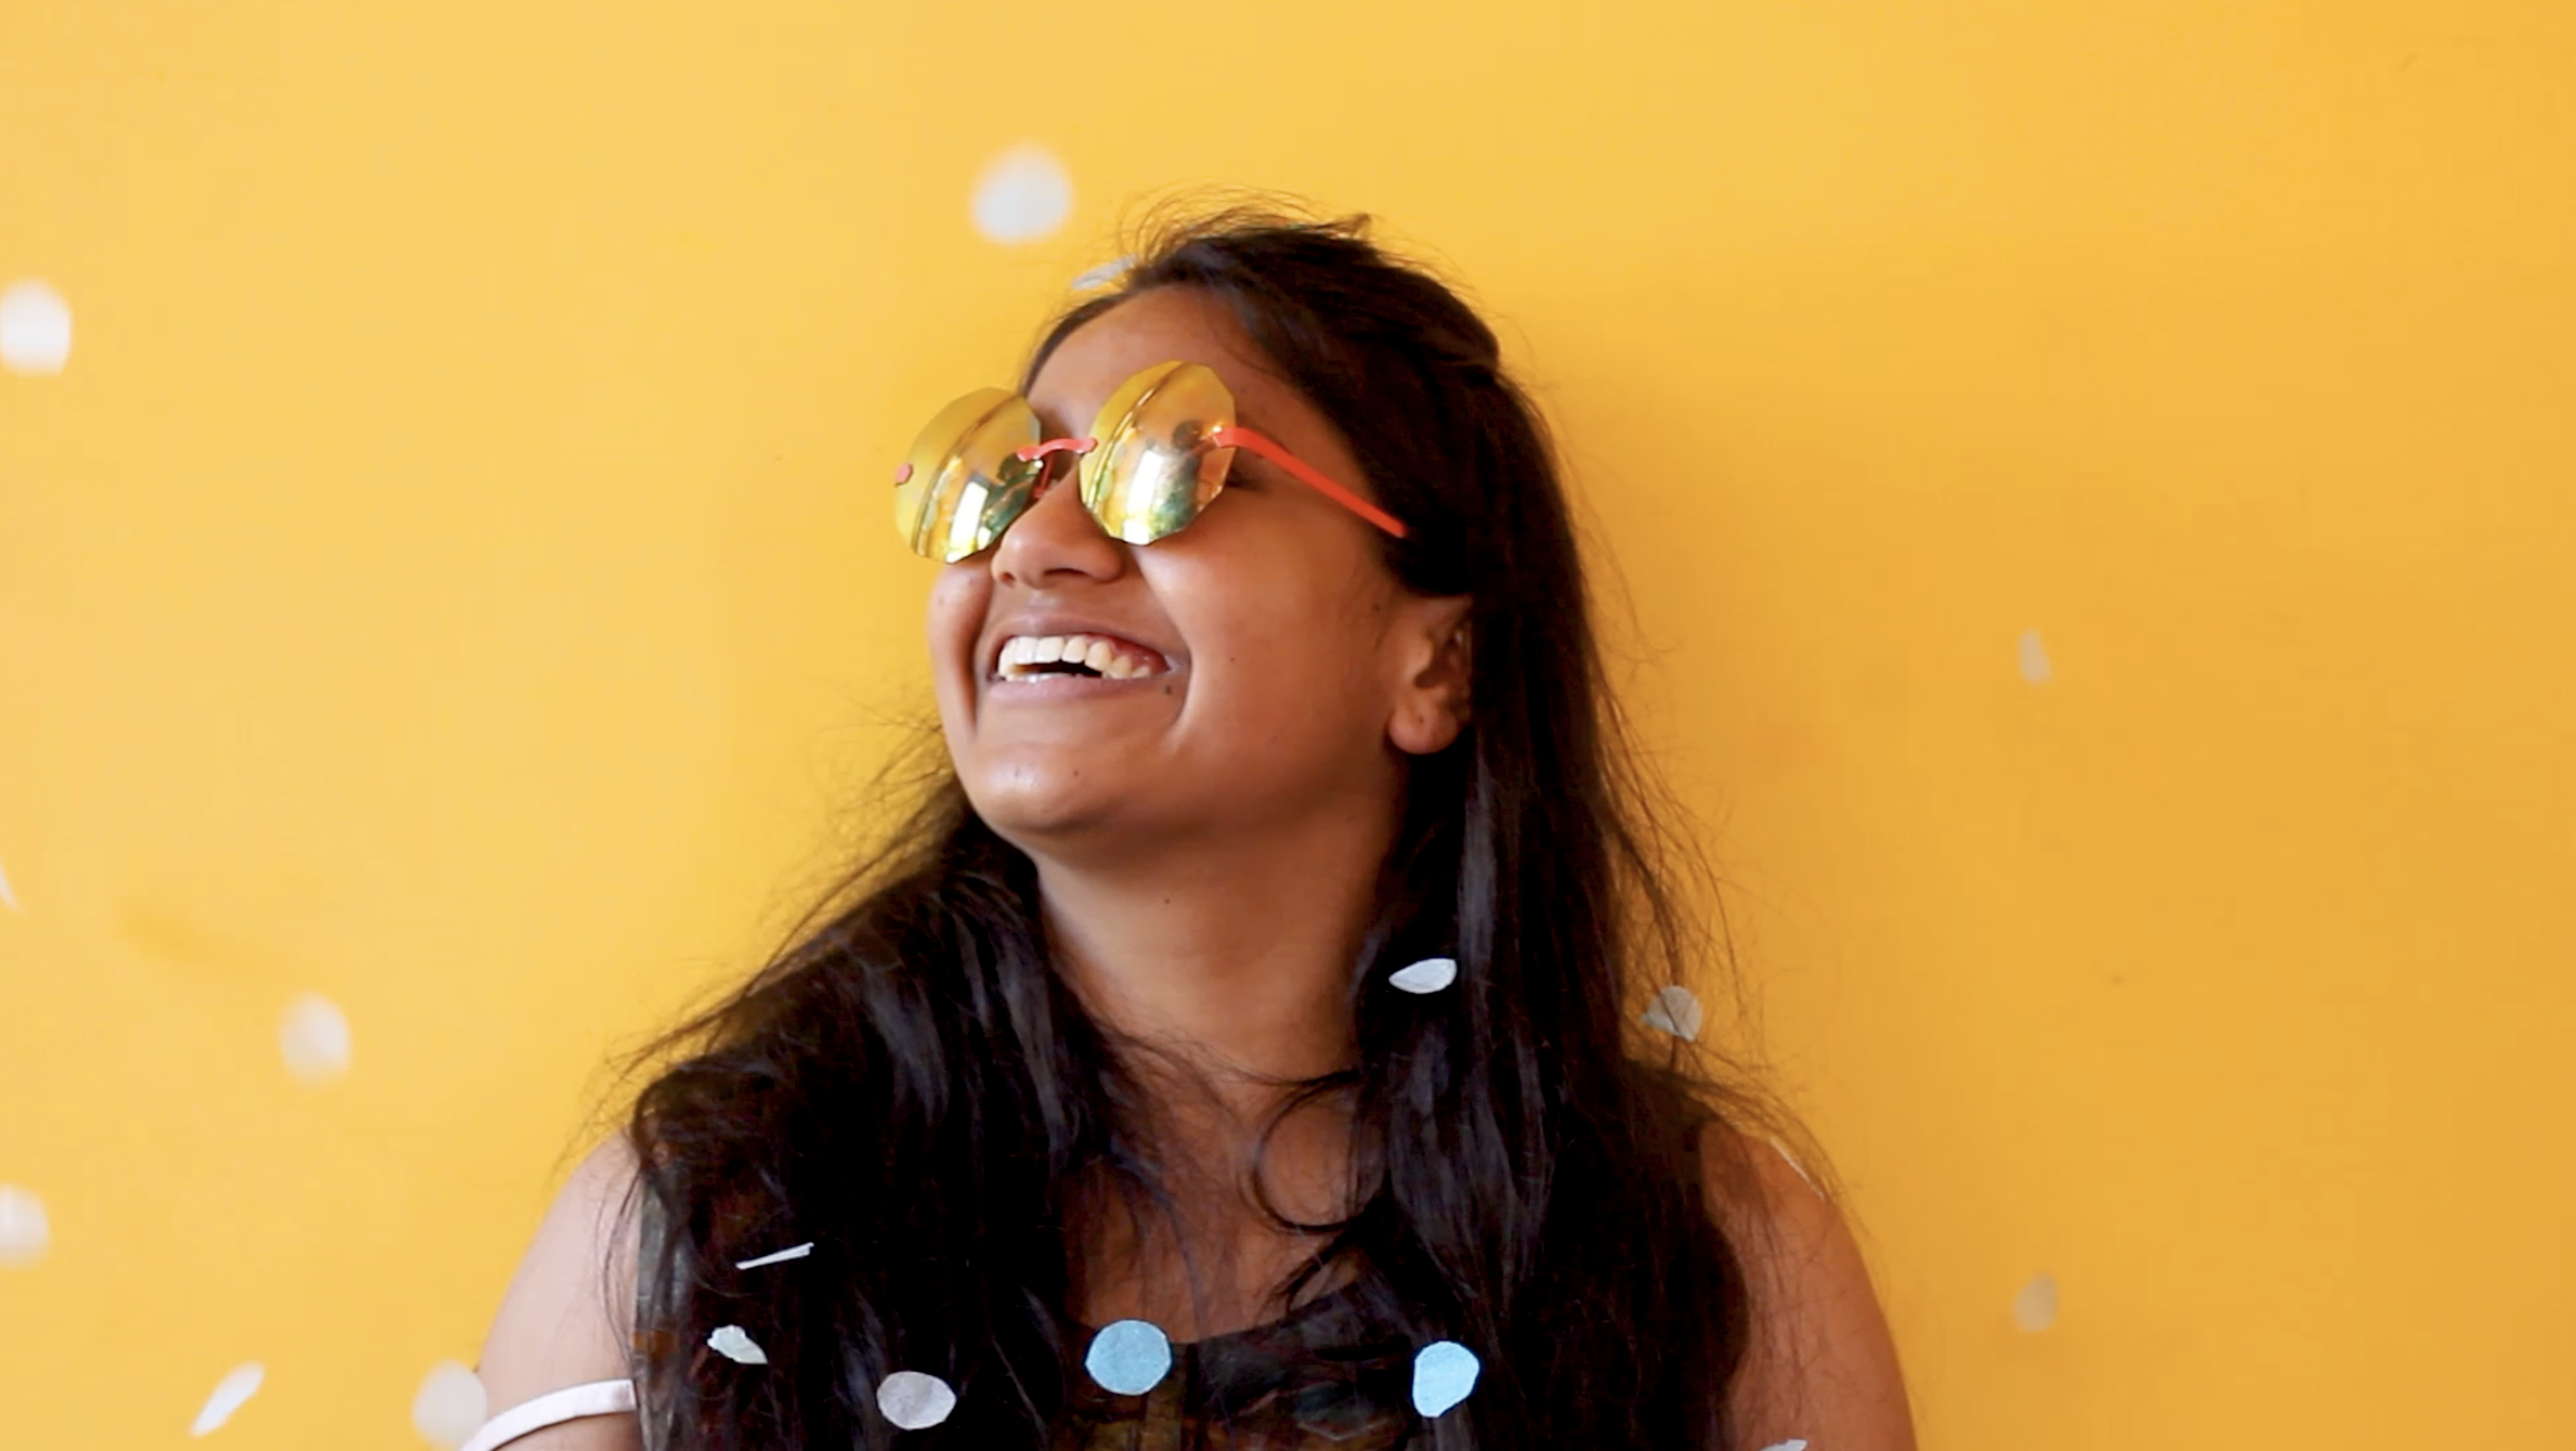 Actor Kalyani smiles past the camera in a black shirt and sunglasses. Behind him is a yellow wall.